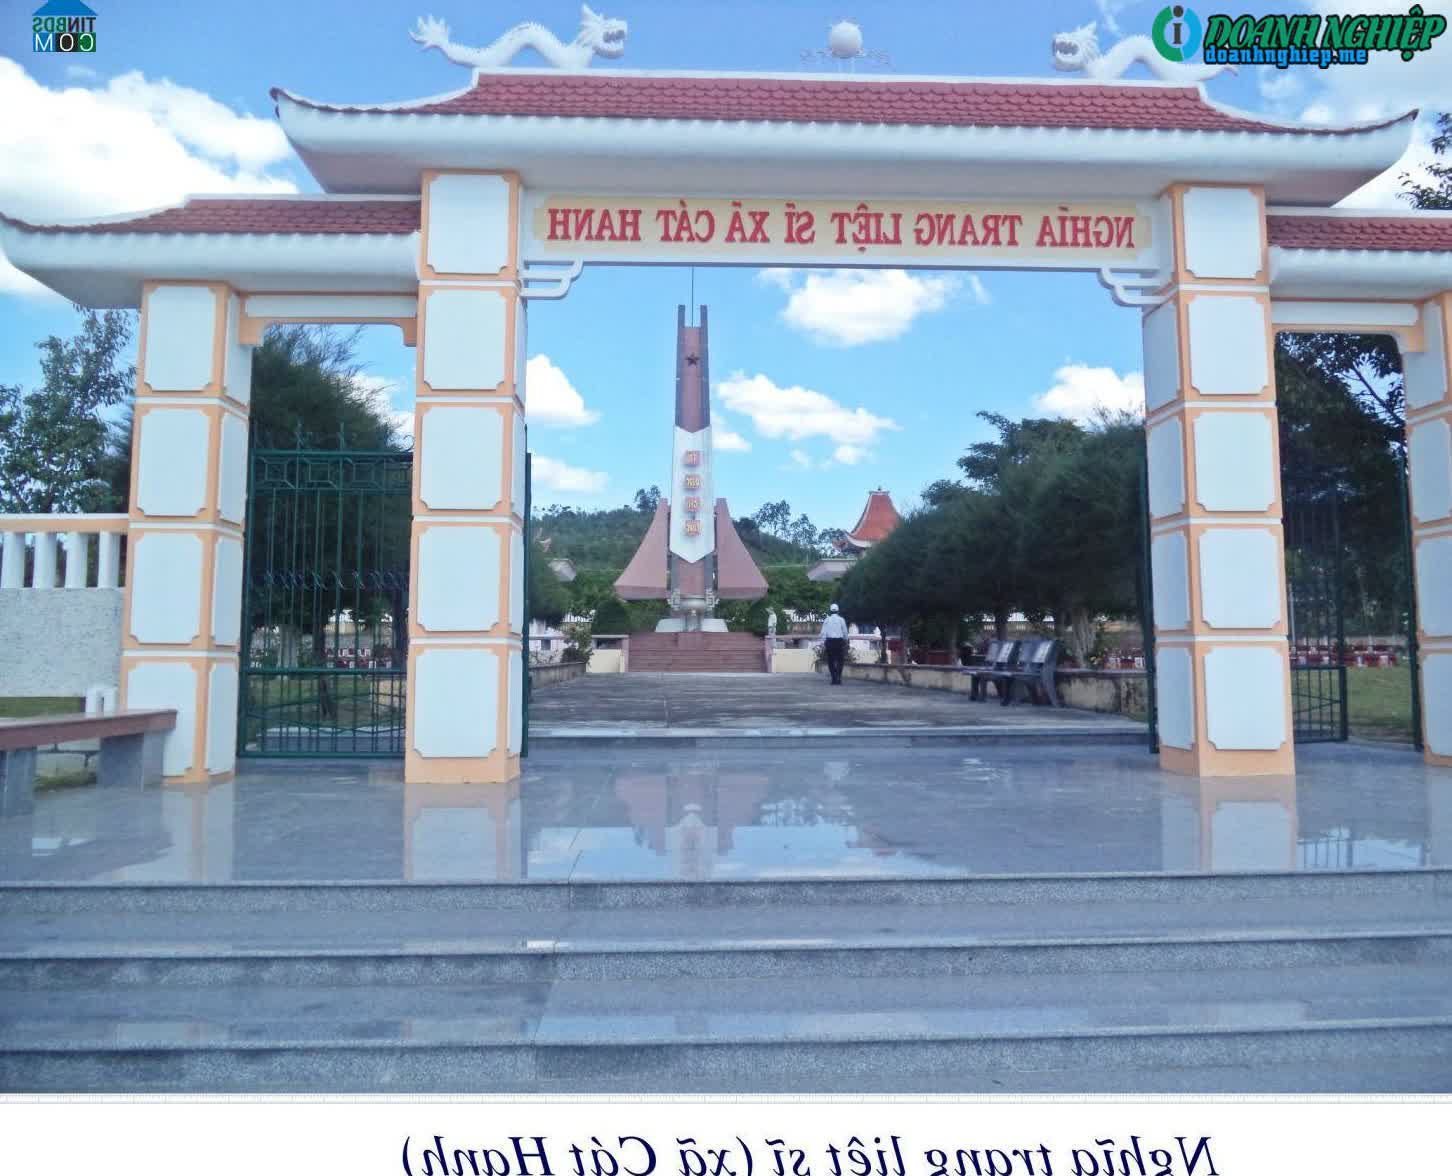 Image of List companies in Cat Hanh Commune- Phu Cat District- Binh Dinh